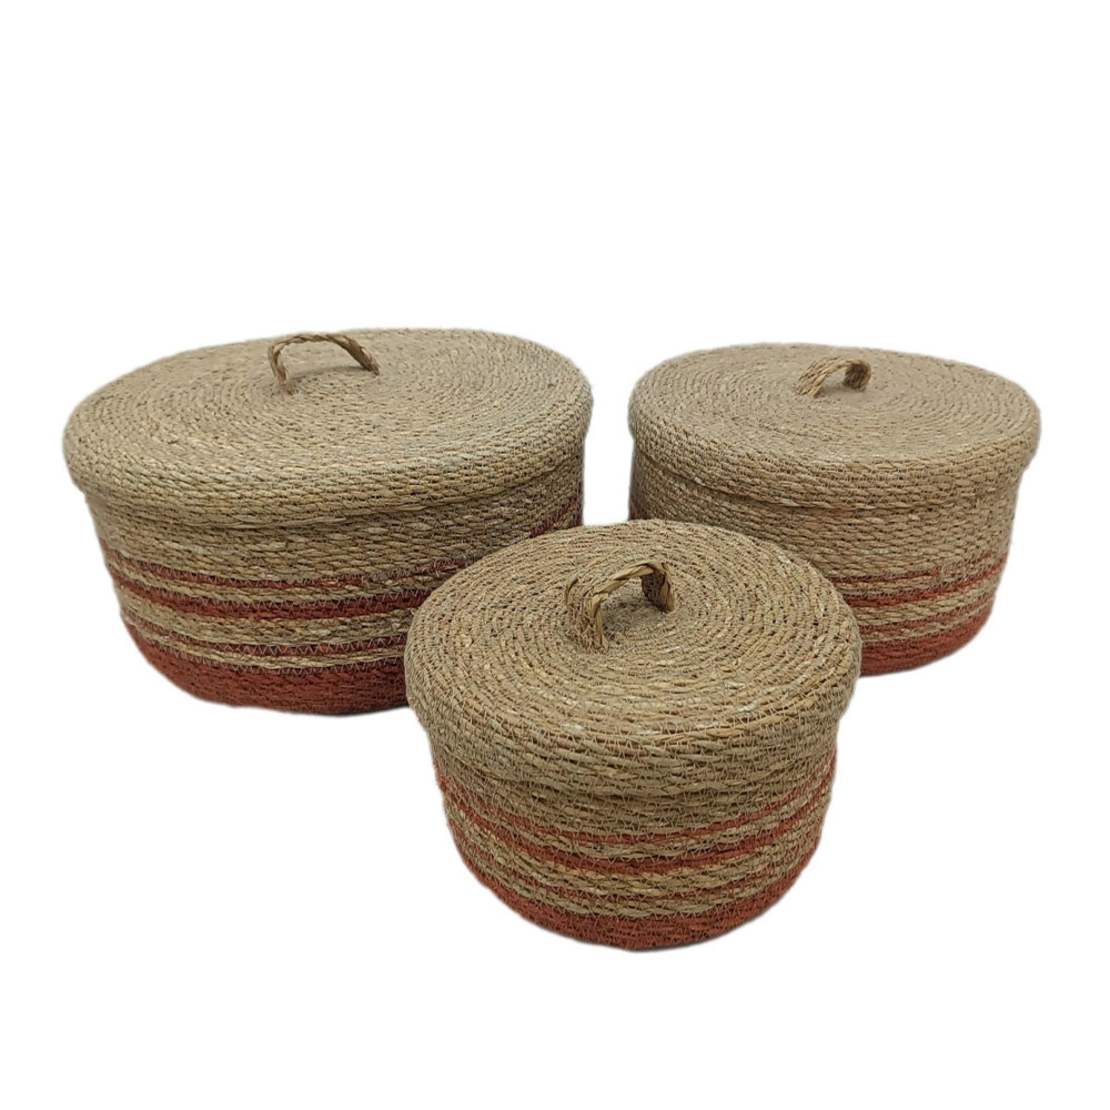 CASSIA BOX WITH LID SET 3PCS SEAGRASS NATURAL TERR